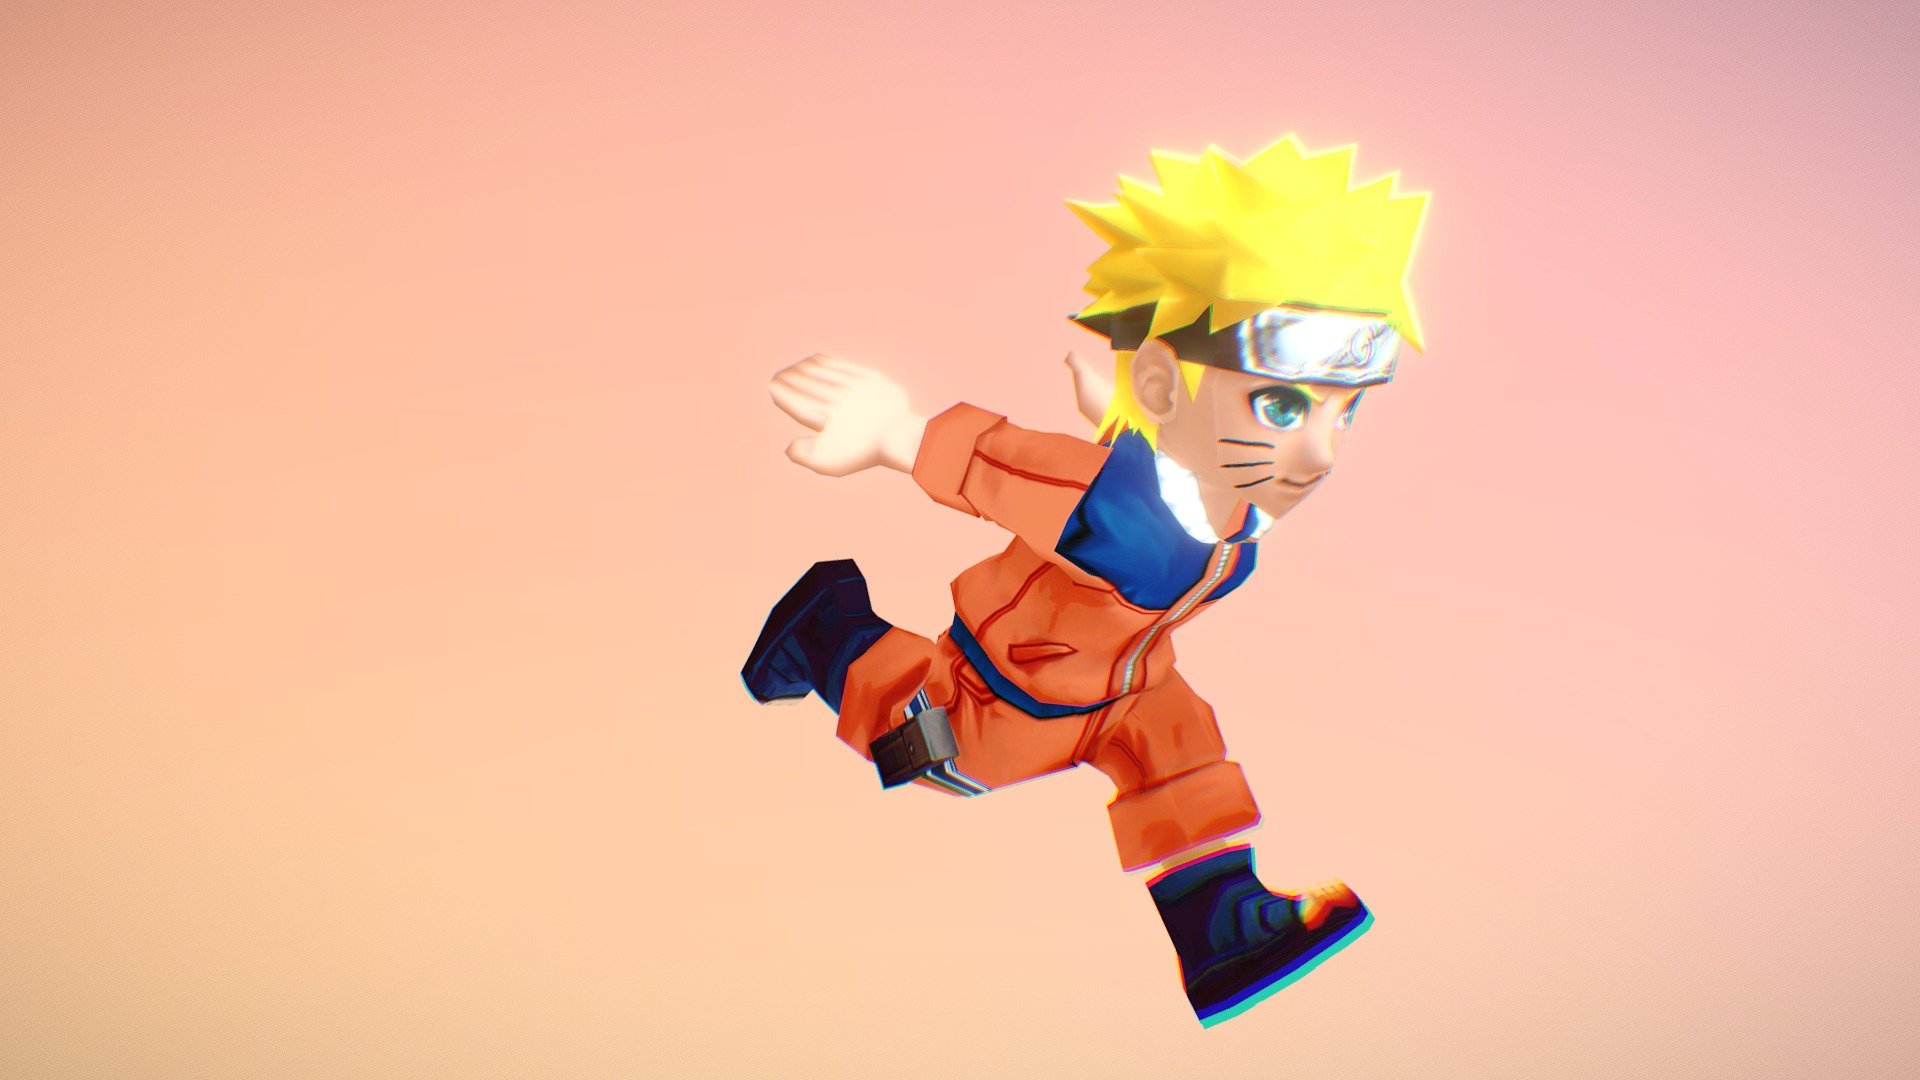 Cute Naruto.

this model Was created in 2011.
tools：3dsmax、PS

I haven't finished the store setting yet,maybe open download later($) 3d model